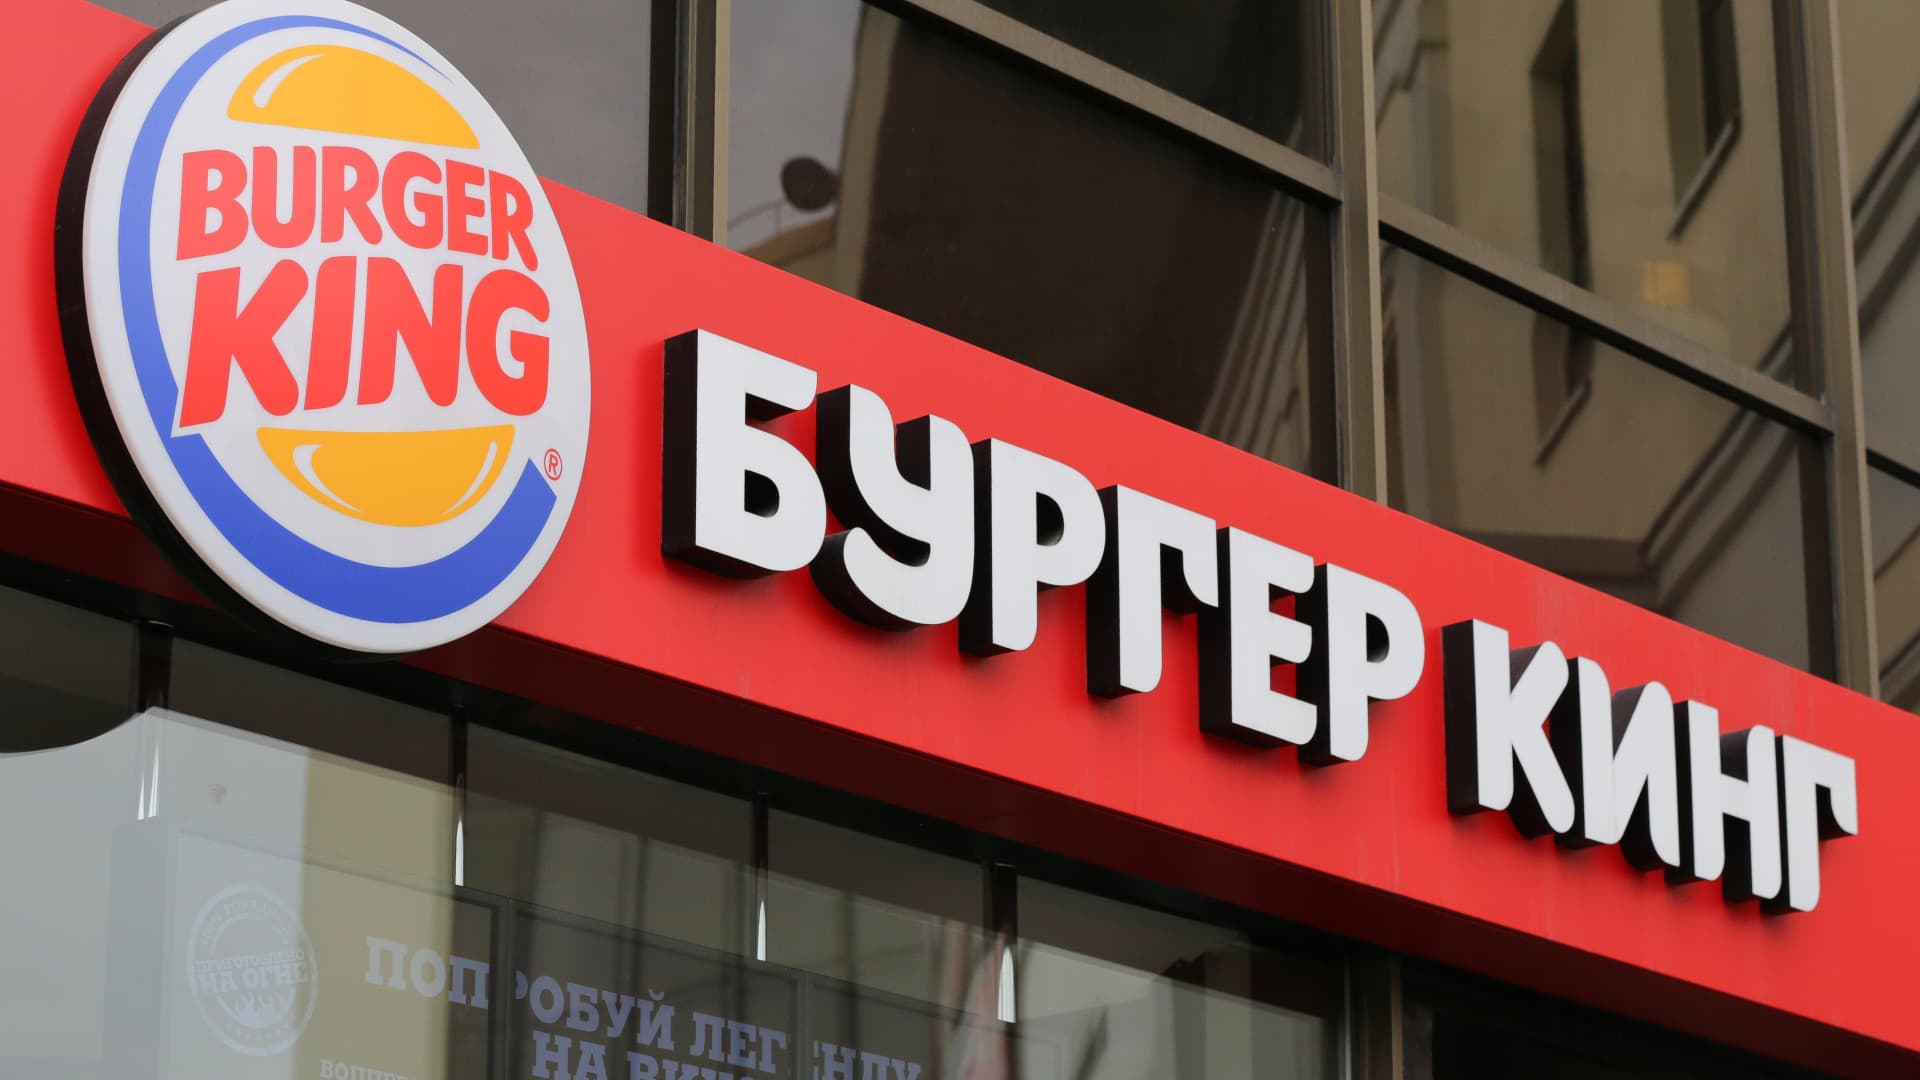 107032725 1647605714619 gettyimages 166059871 RUSSIA FAST FOOD